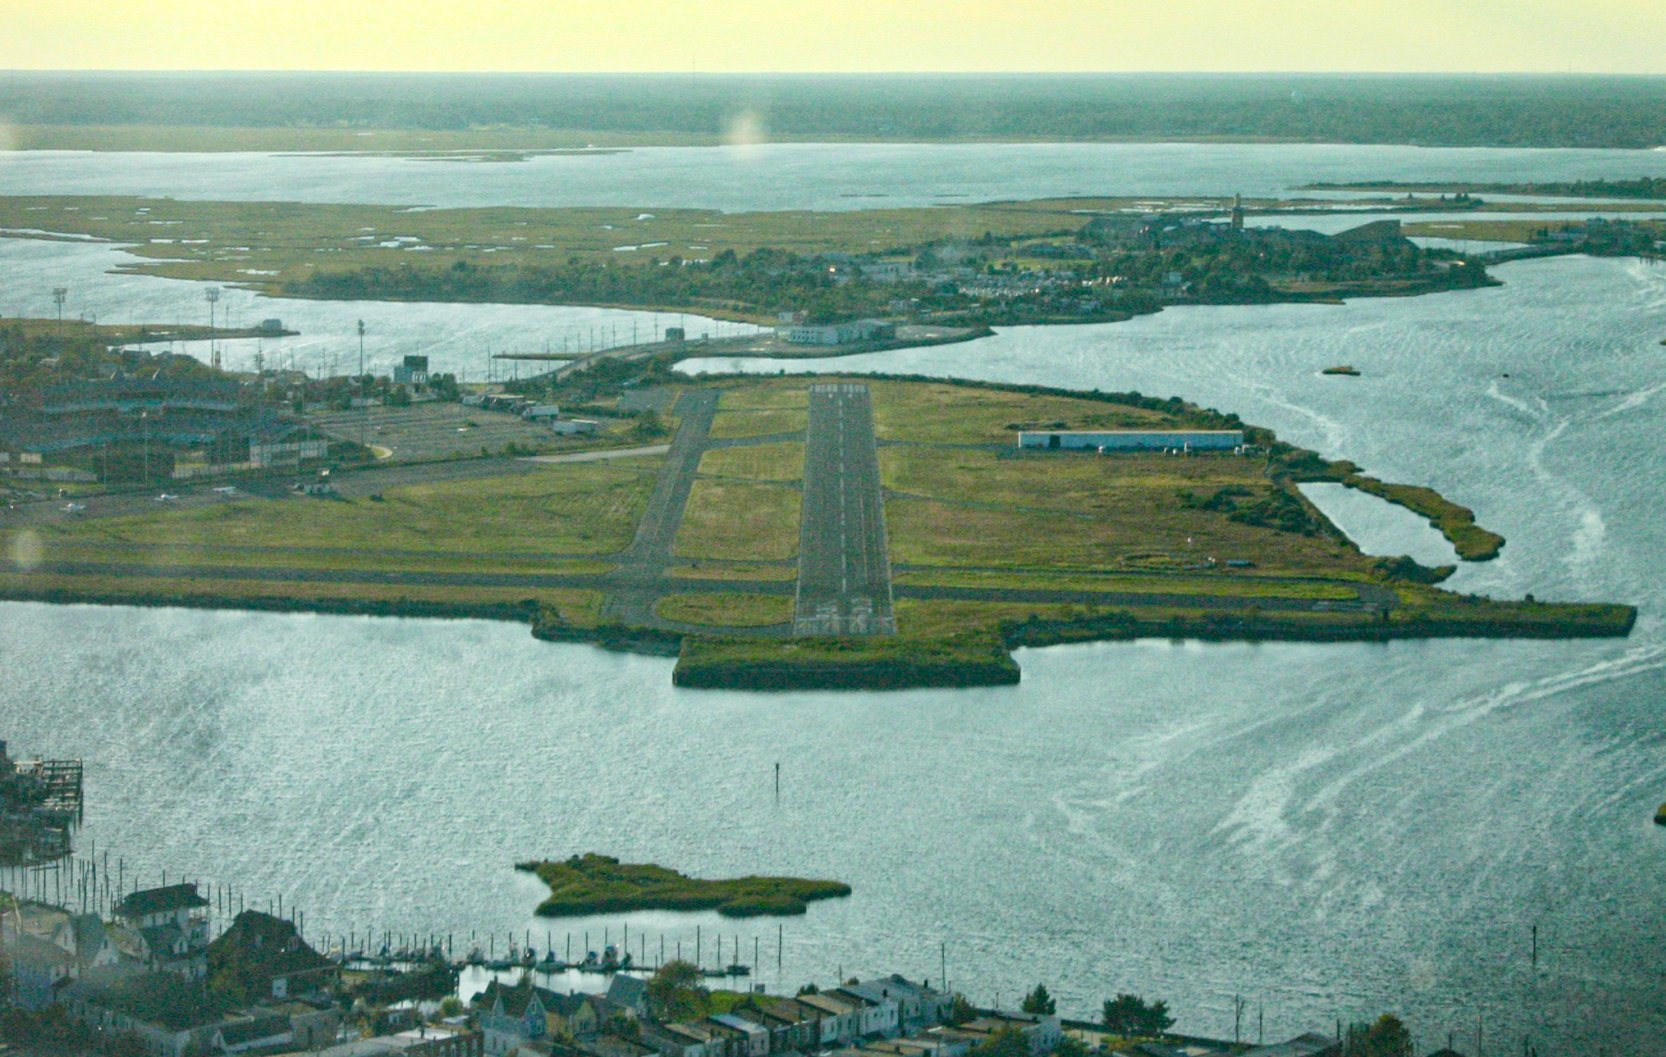 Bader Field airport from aerial view.